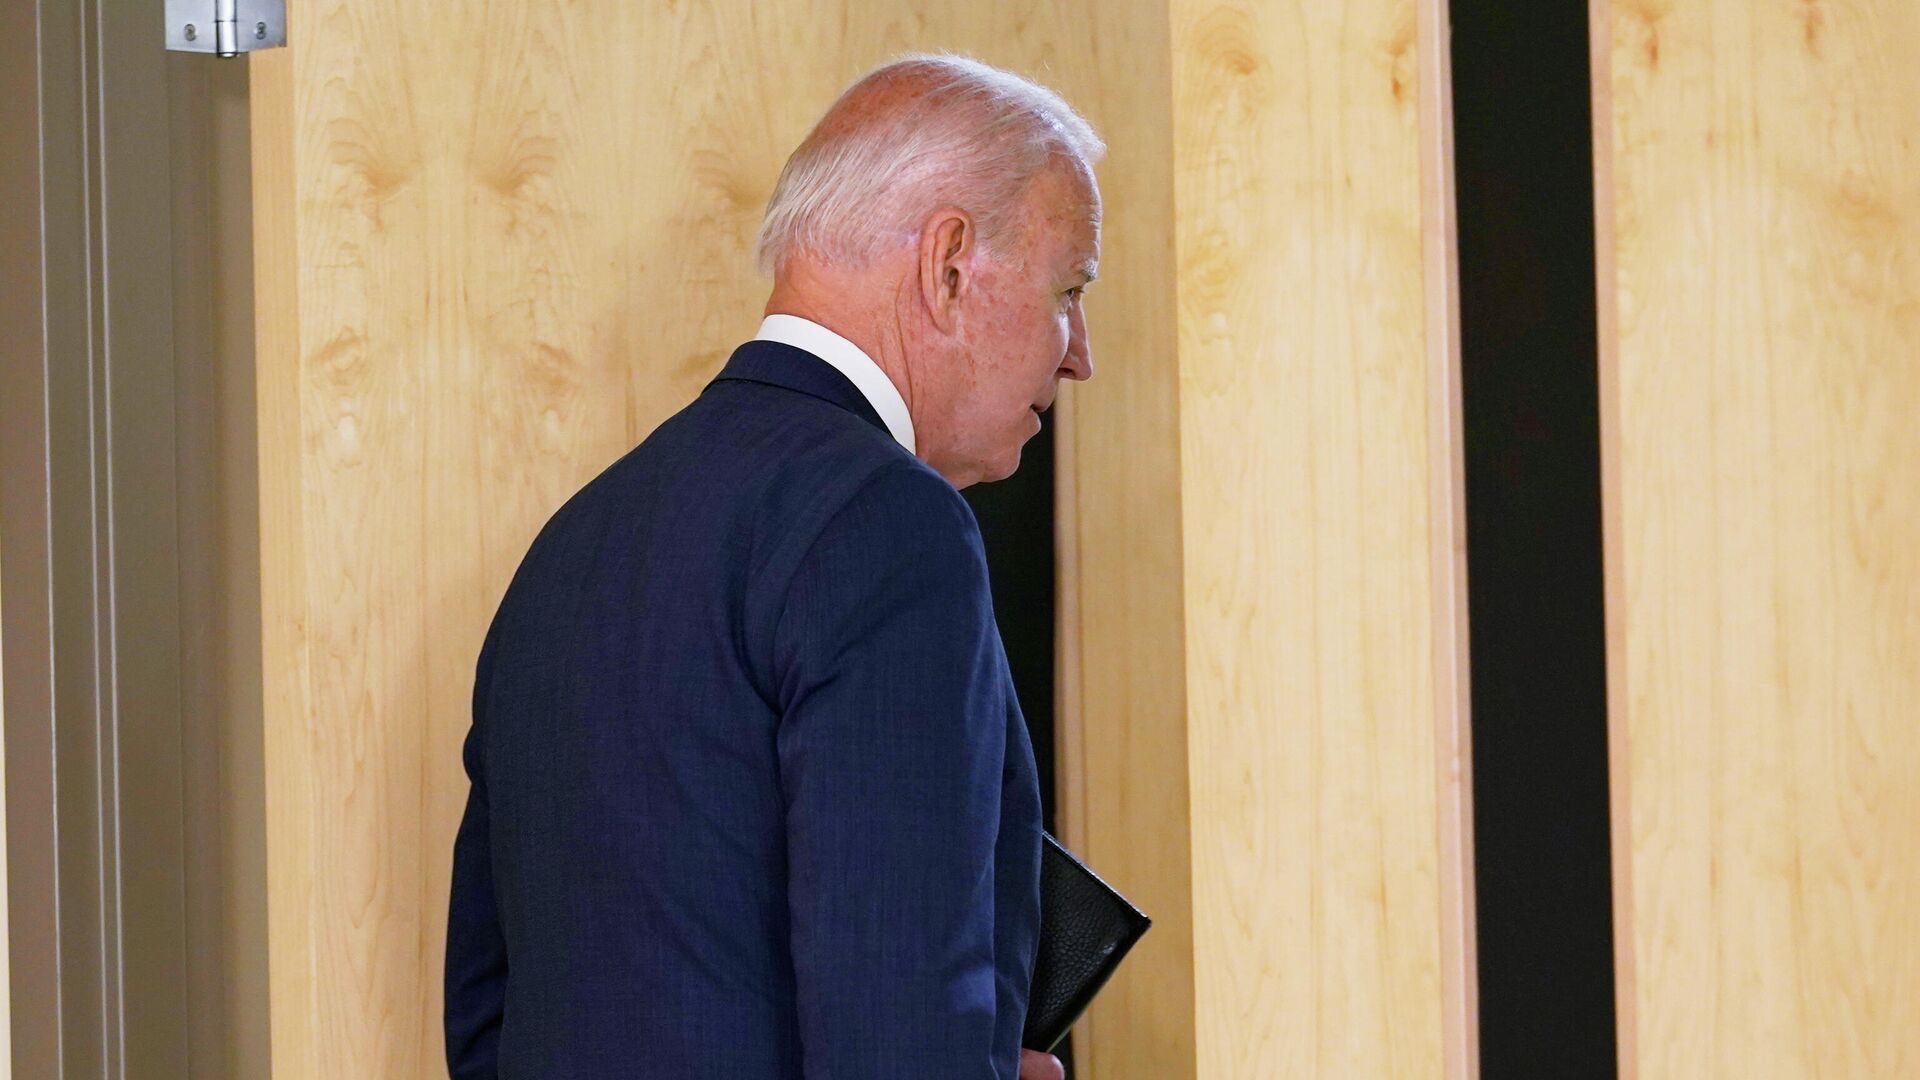 President Joe Biden walks away after talking about the May jobs report from the Rehoboth Beach Convention Center in Rehoboth Beach, Del., Friday, June 4, 2021 - Sputnik International, 1920, 28.12.2021